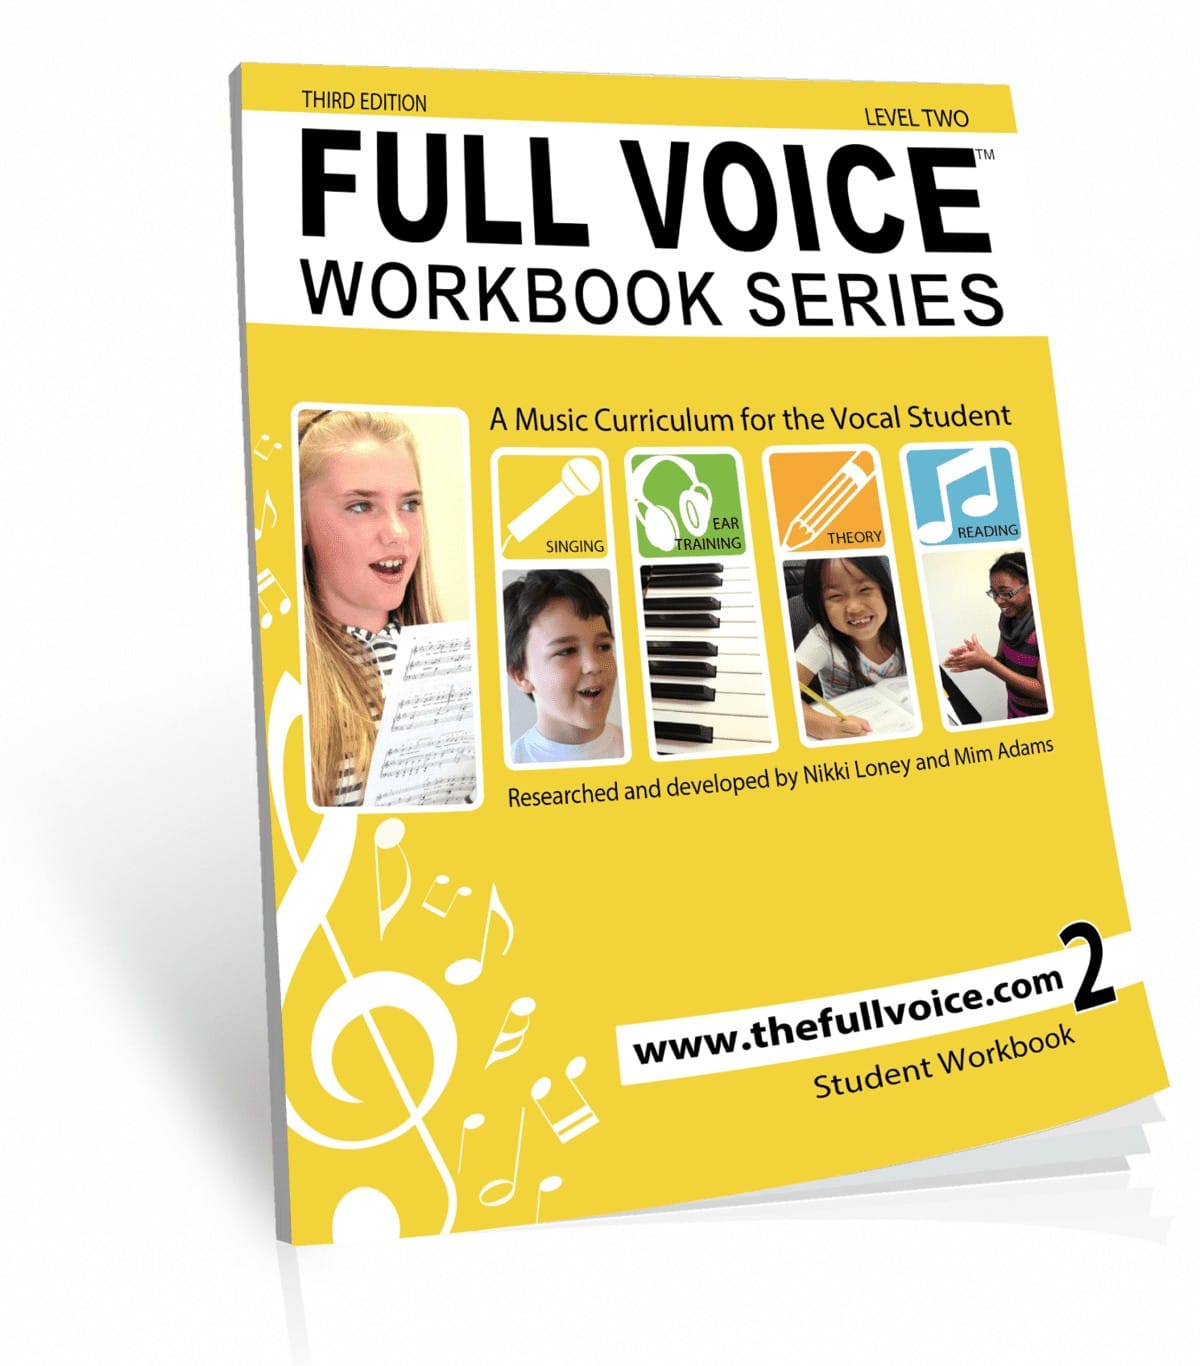 FULL VOICE Student Workbook - Level Two